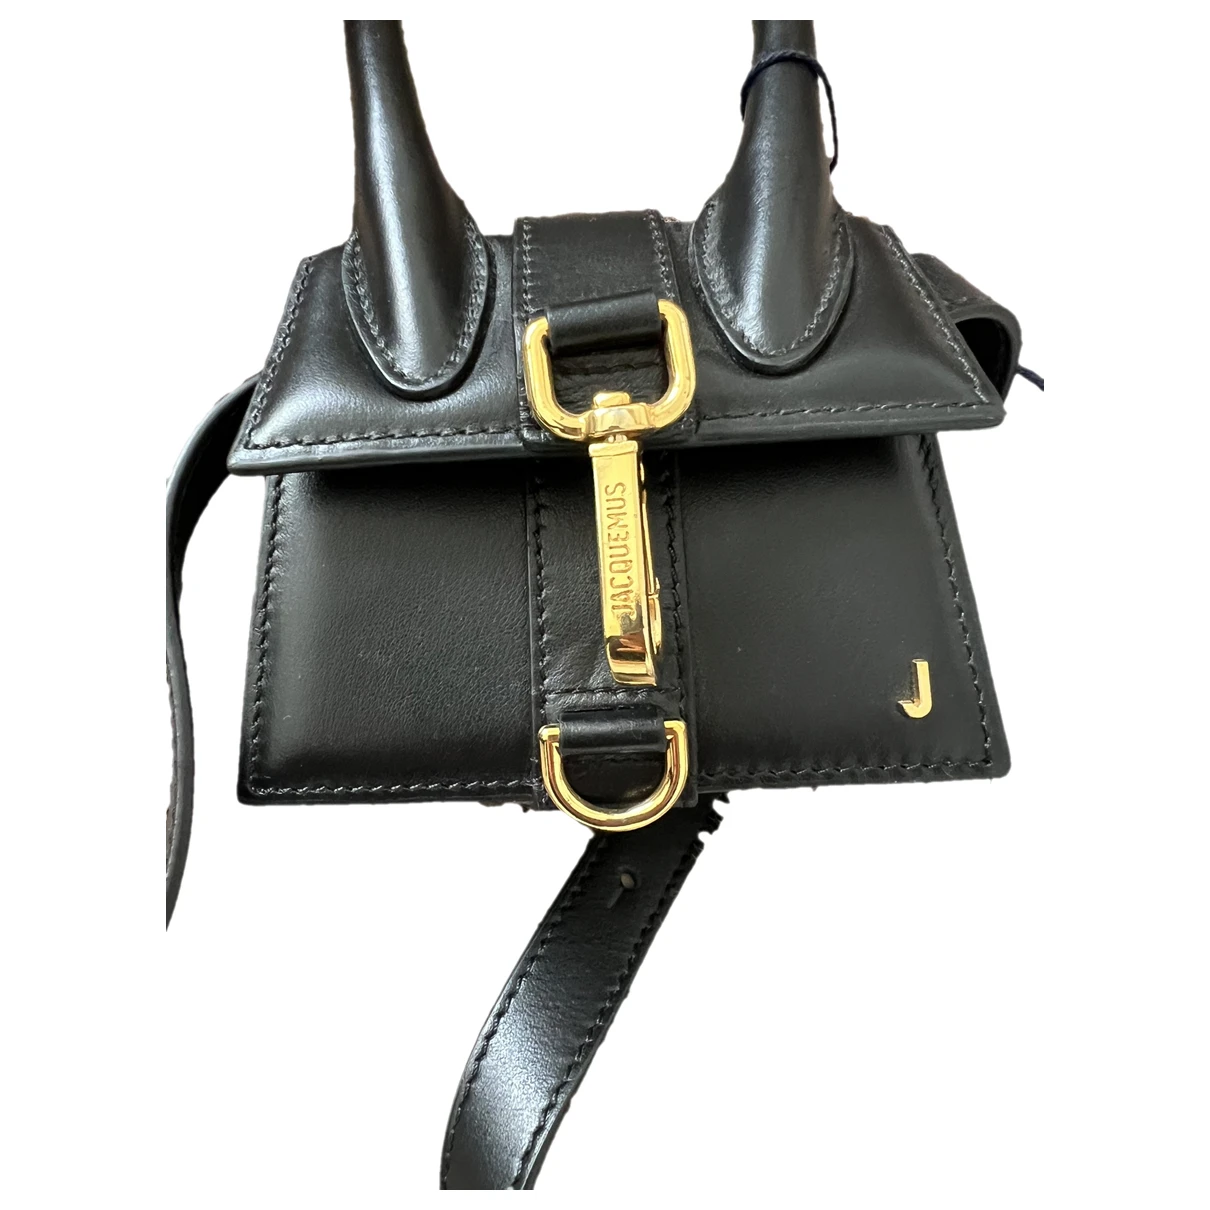 Pre-owned Jacquemus Chiquito Leather Handbag In Black